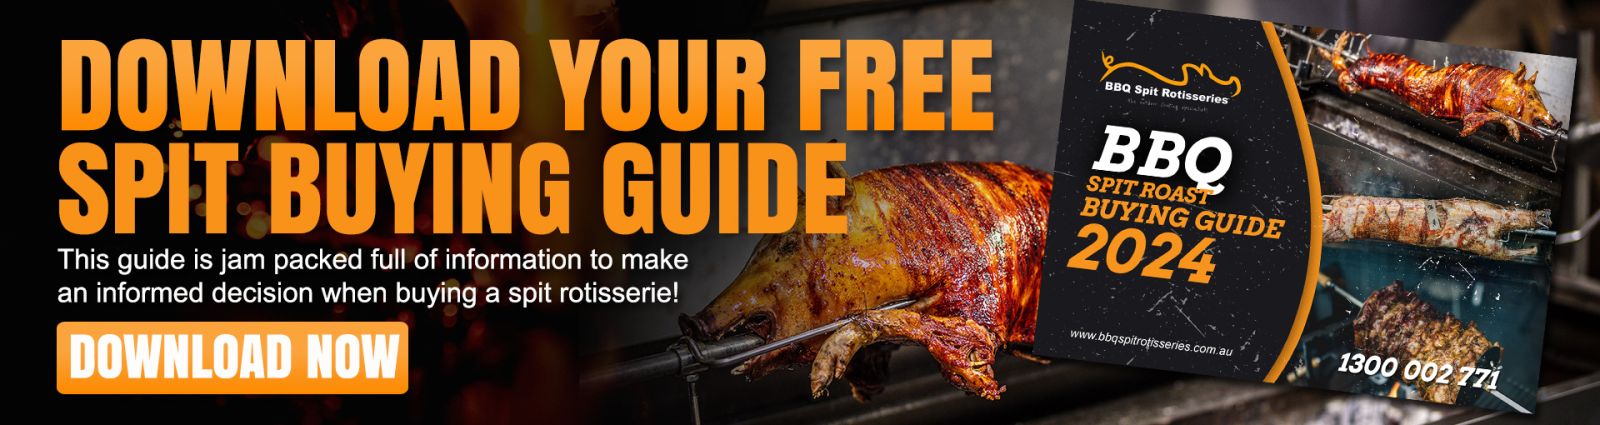 This is a picture of the spit roast buying guide banner that links to a page where you can download the free guide to help you with your spit roaster purchase